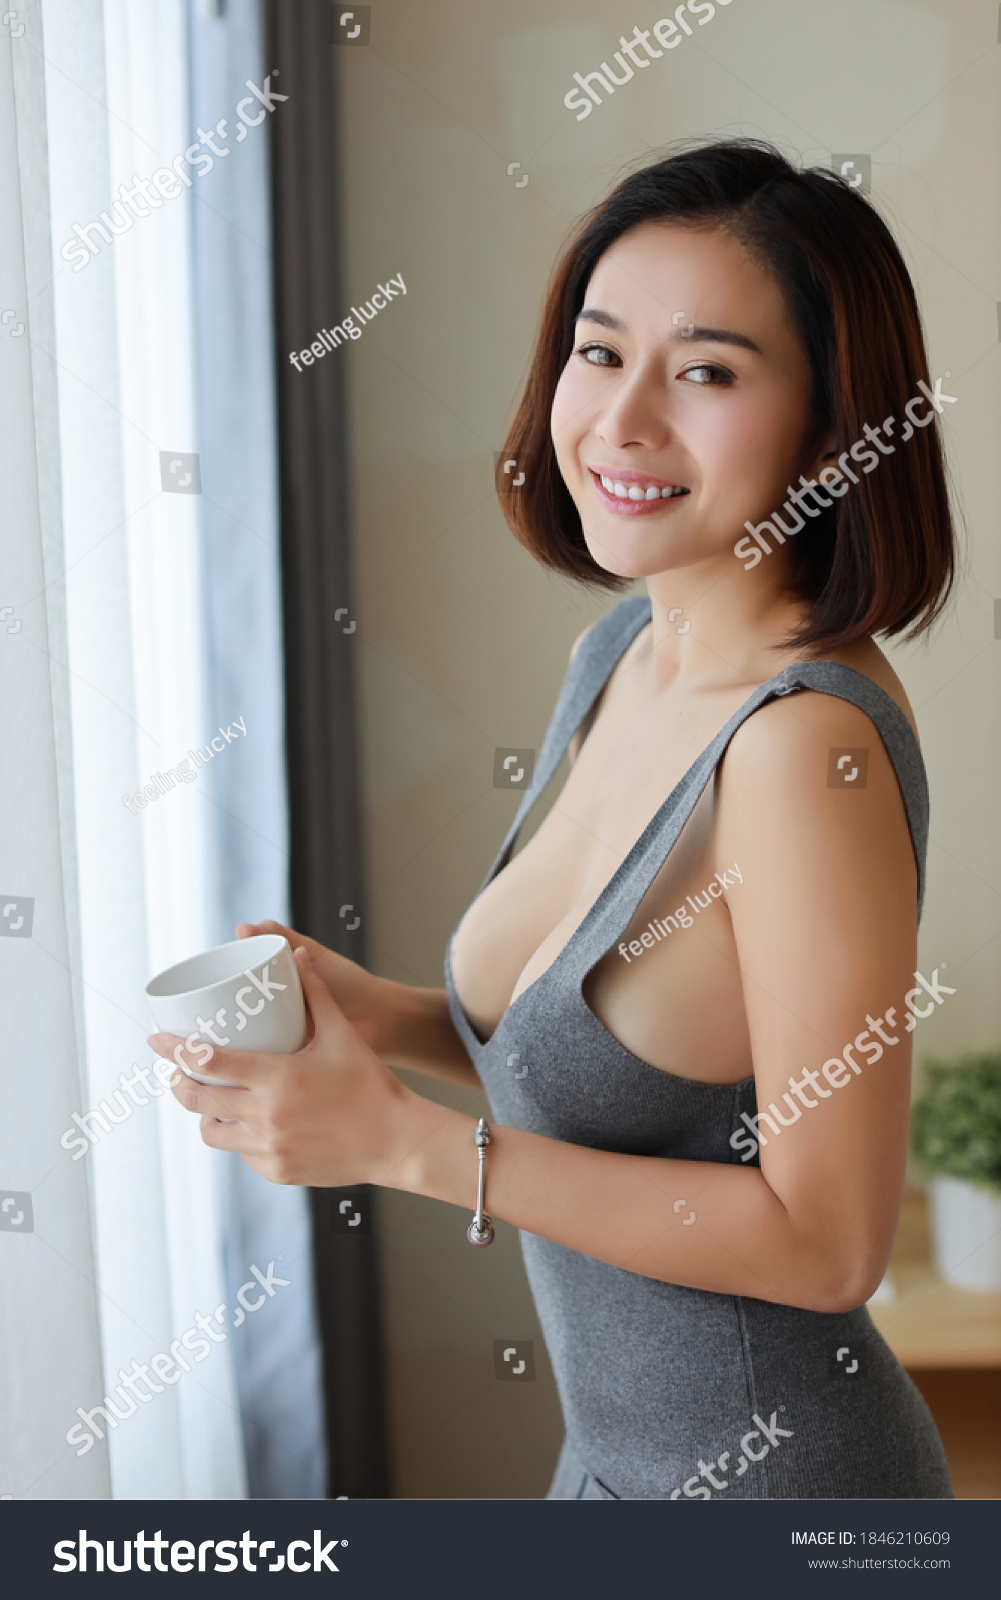 Full Length Stunning Asian Housewife picture